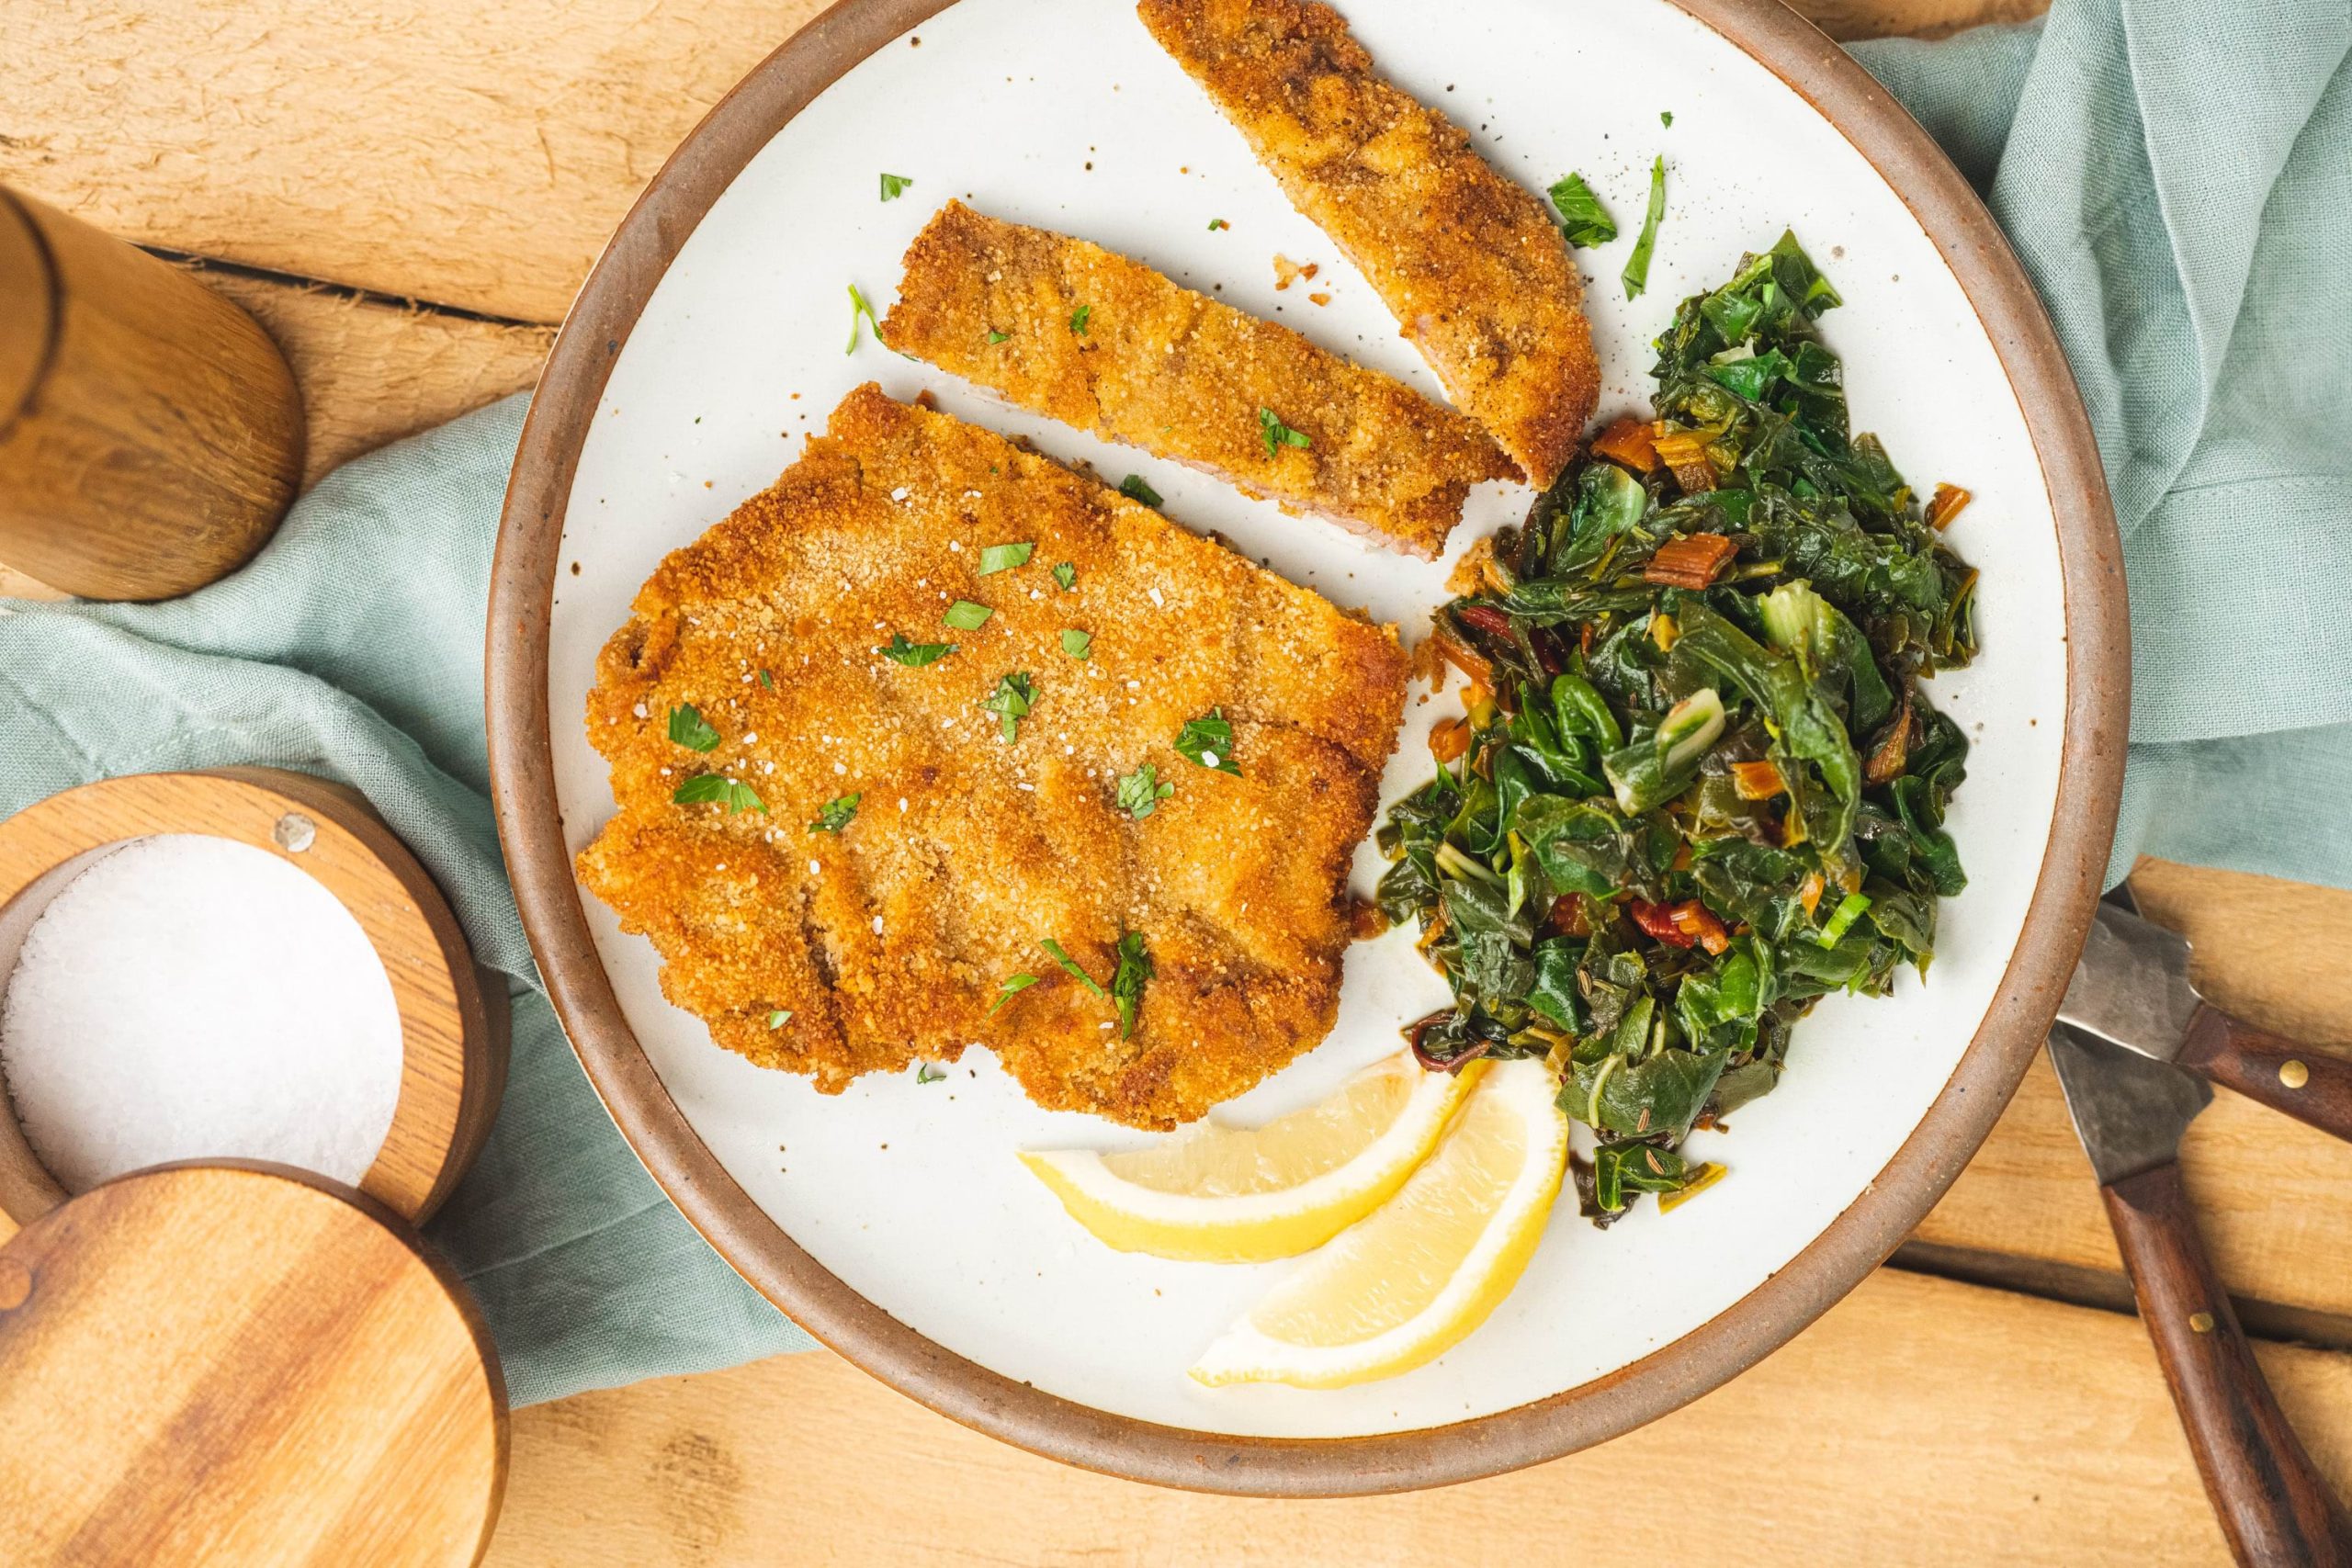 Crispy golden veal schnitzel plated with Swiss Chard rainbow greens and slices of fresh lemon